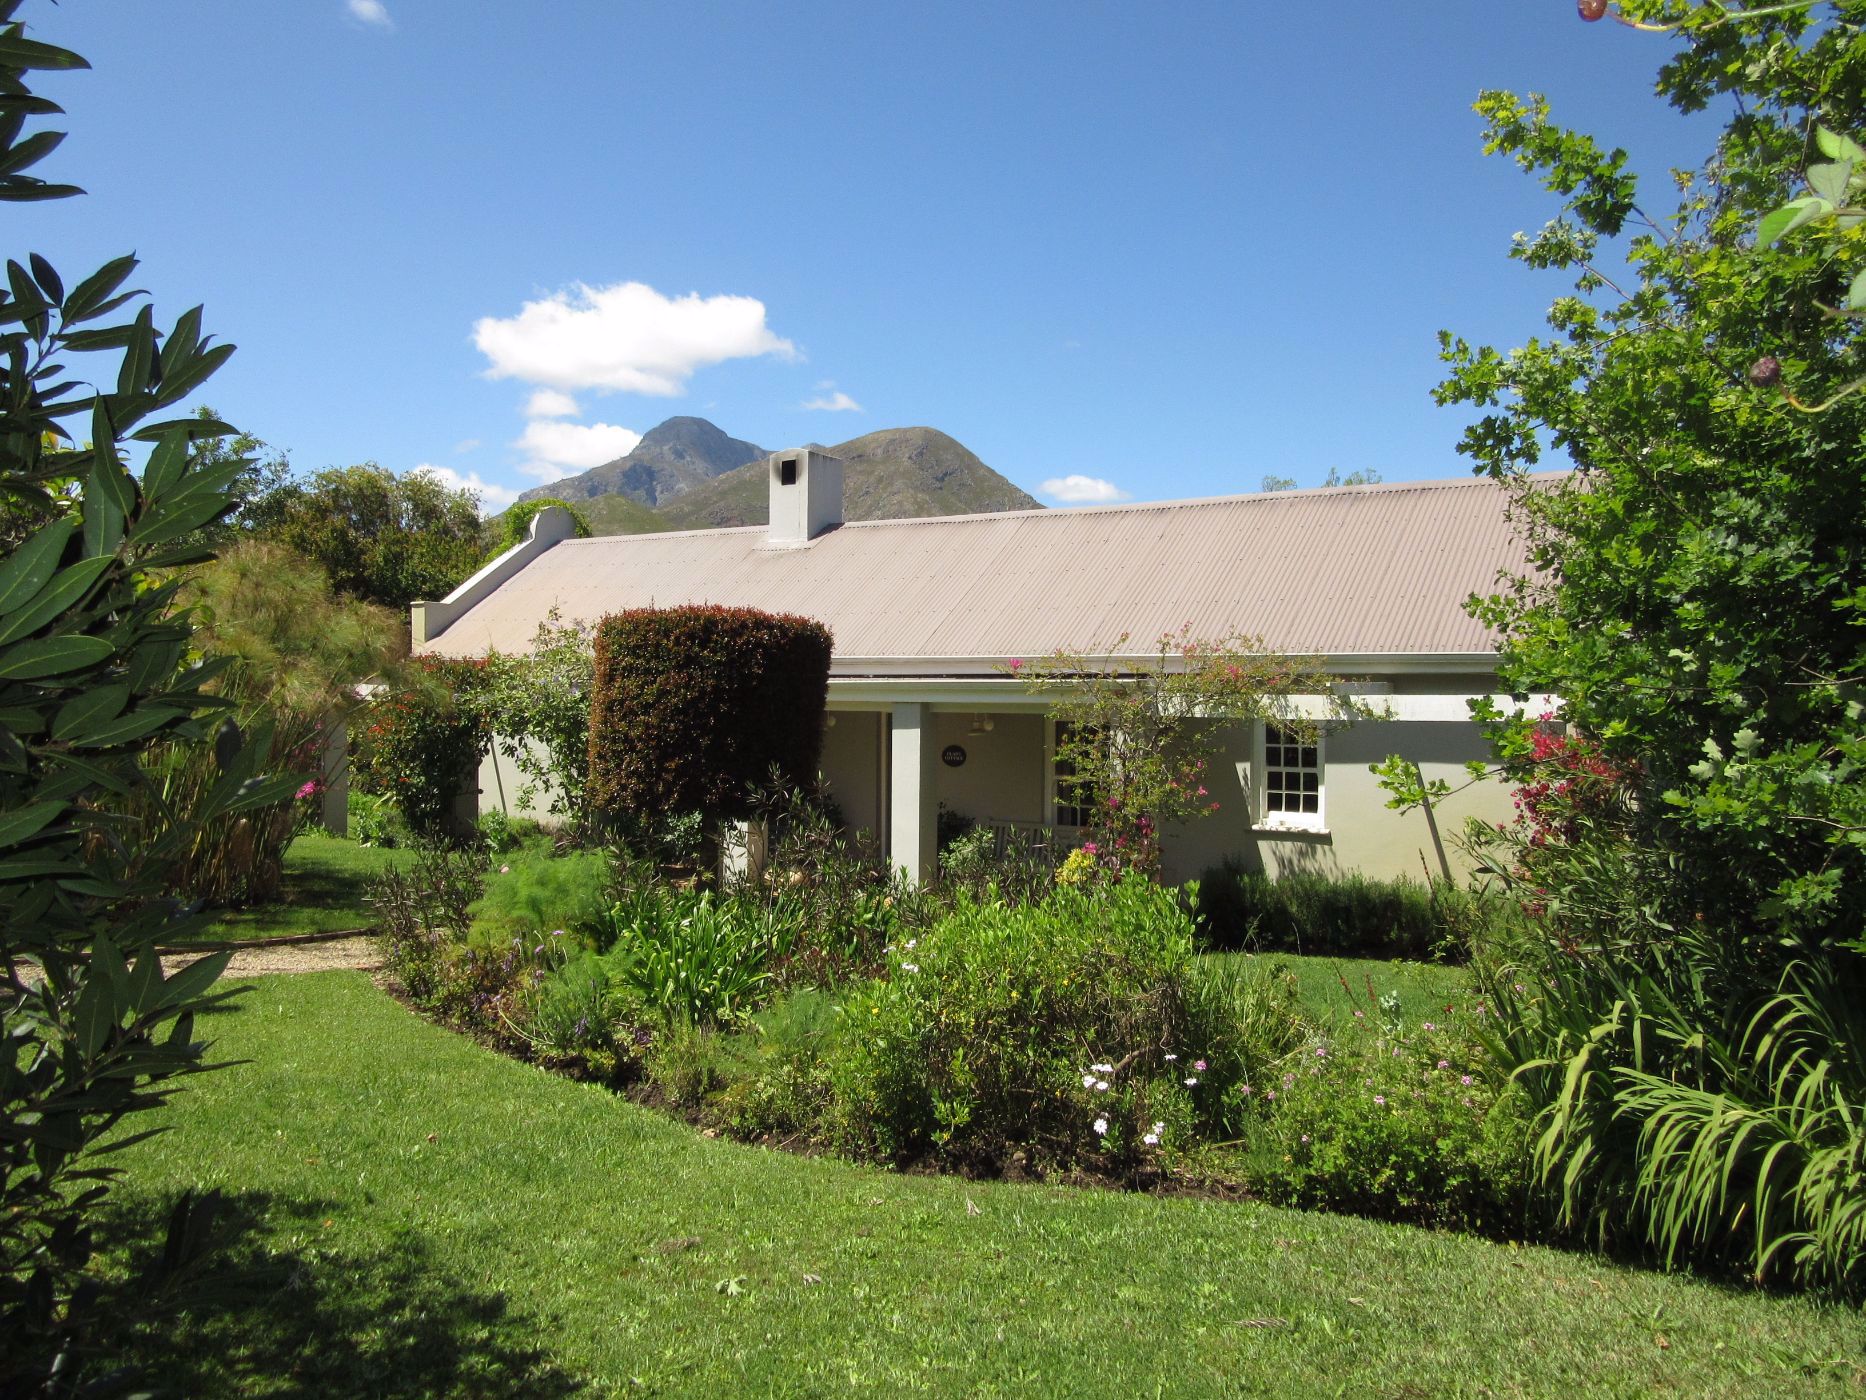 3 bedroom house for sale in Greyton